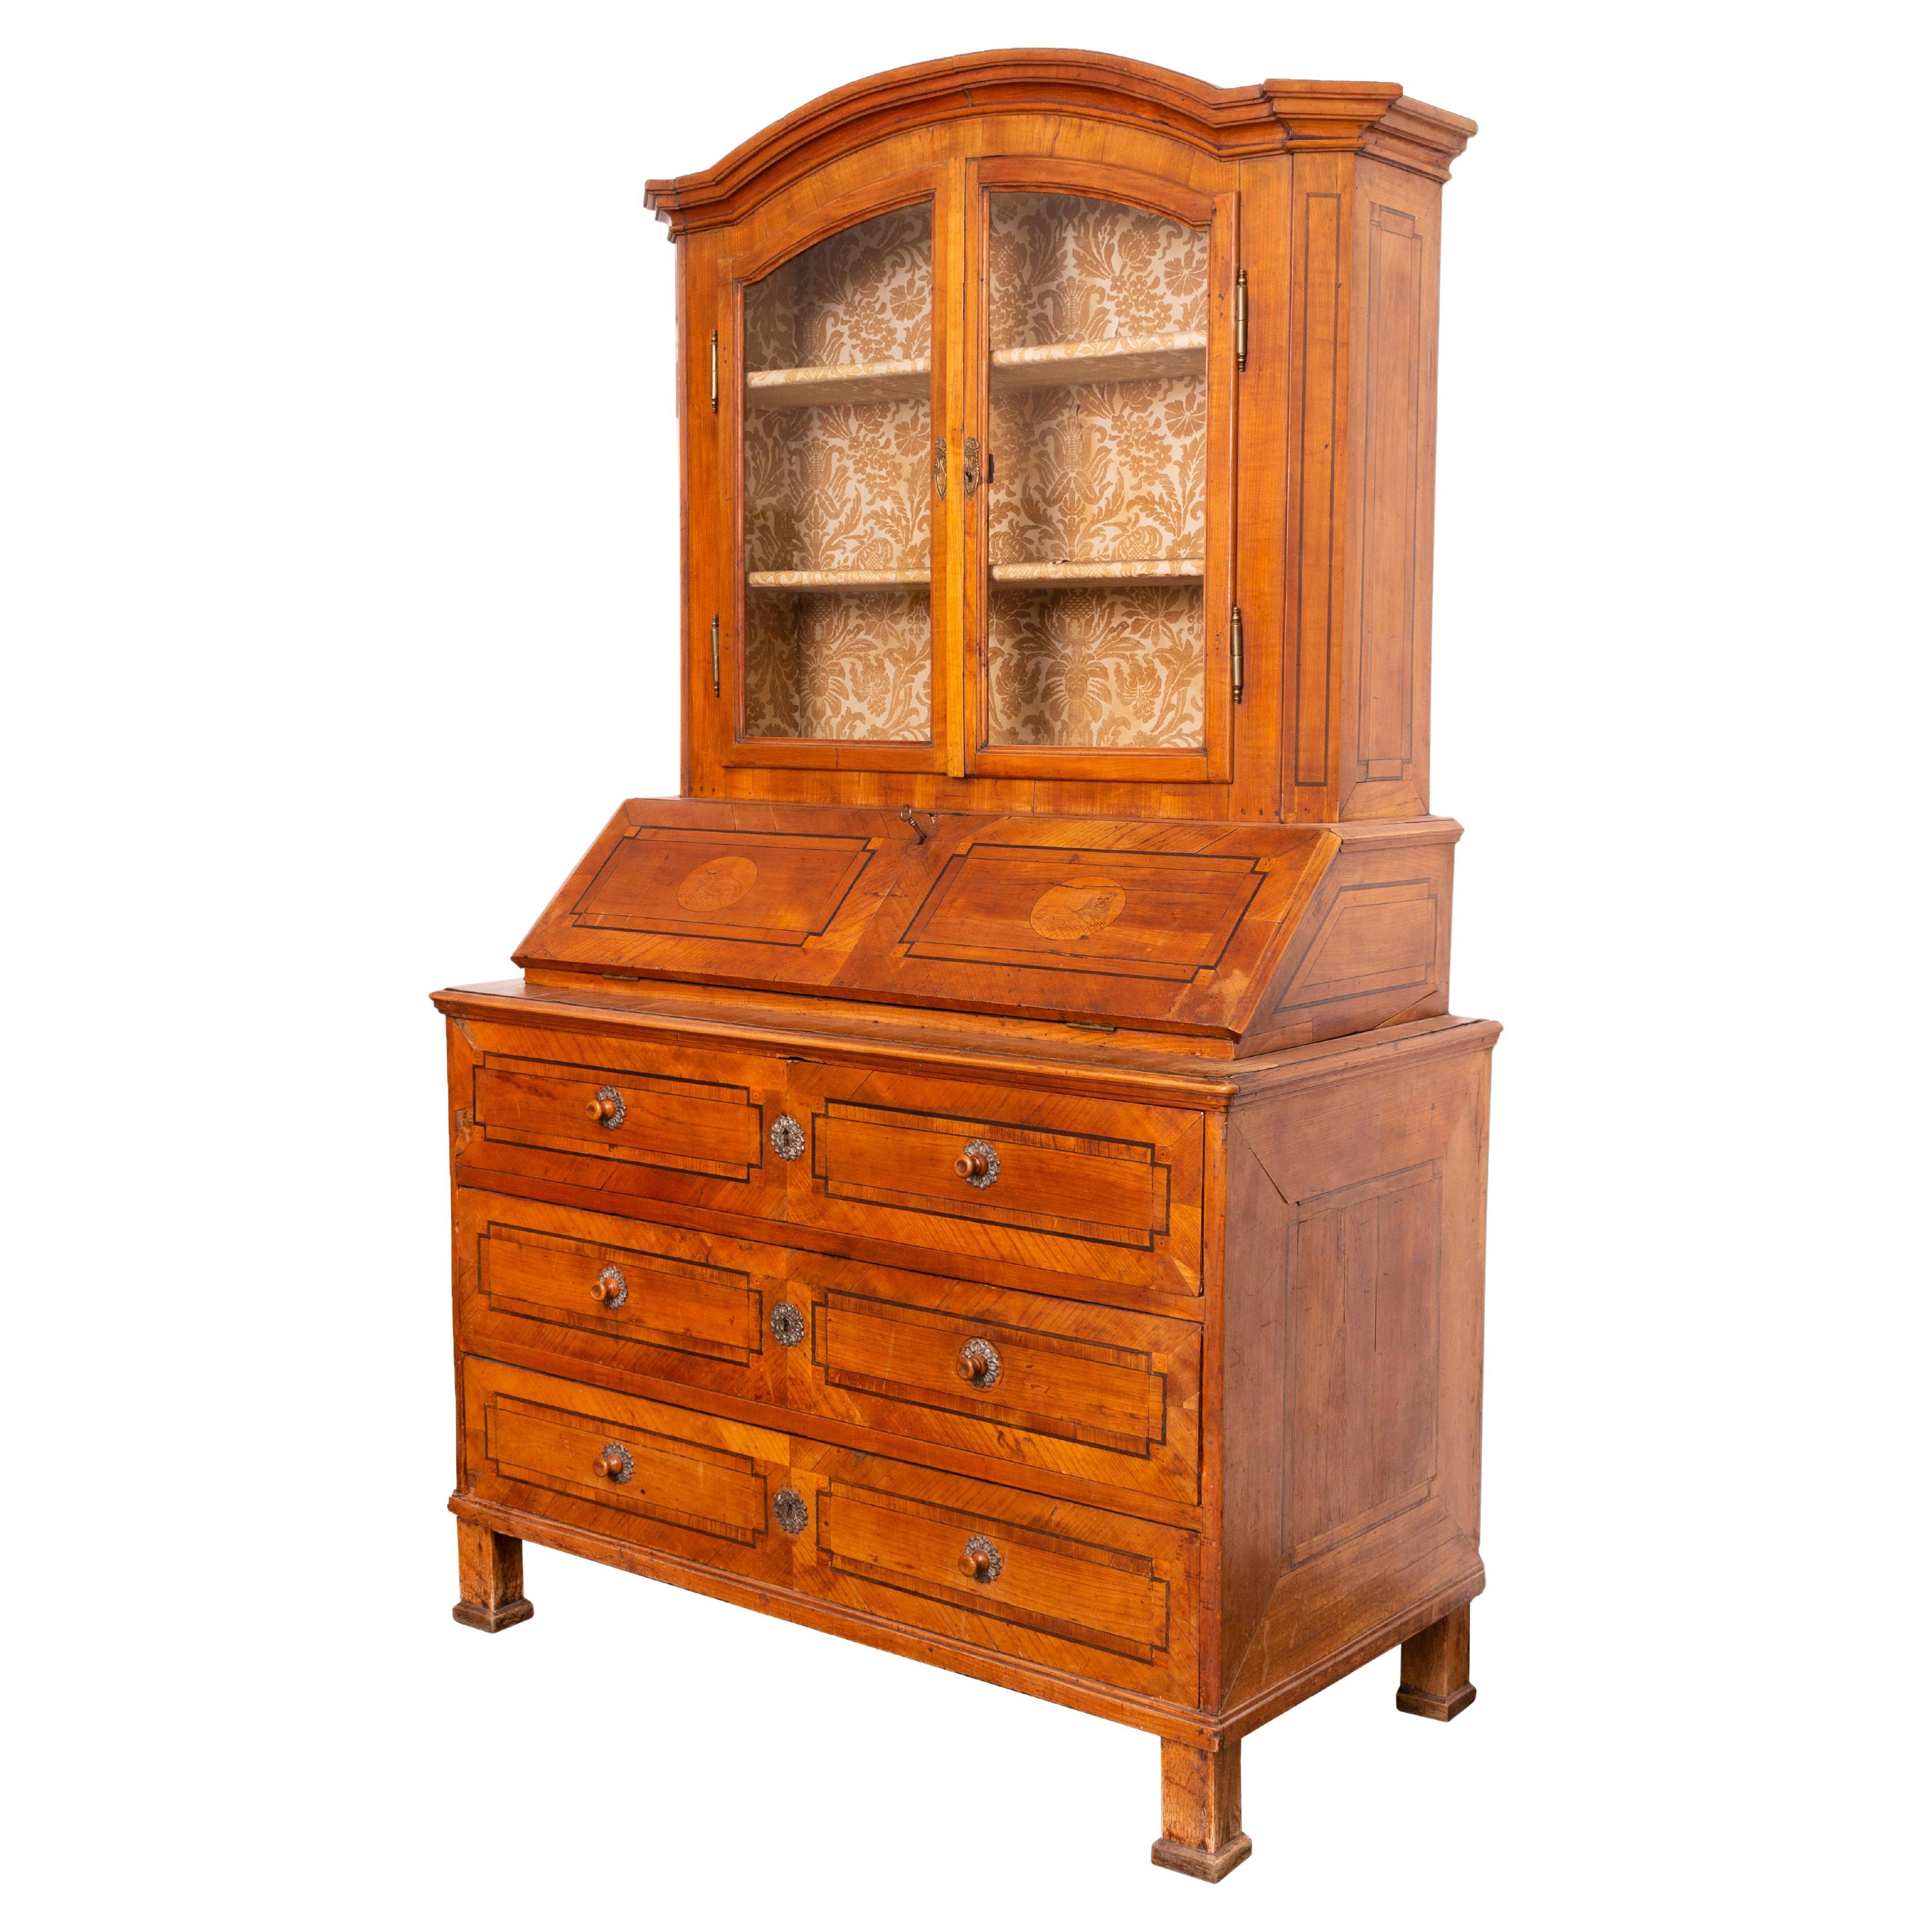 Copf Style Cherry Inlay Secretaire Cabinet, ca. 1800 For Sale